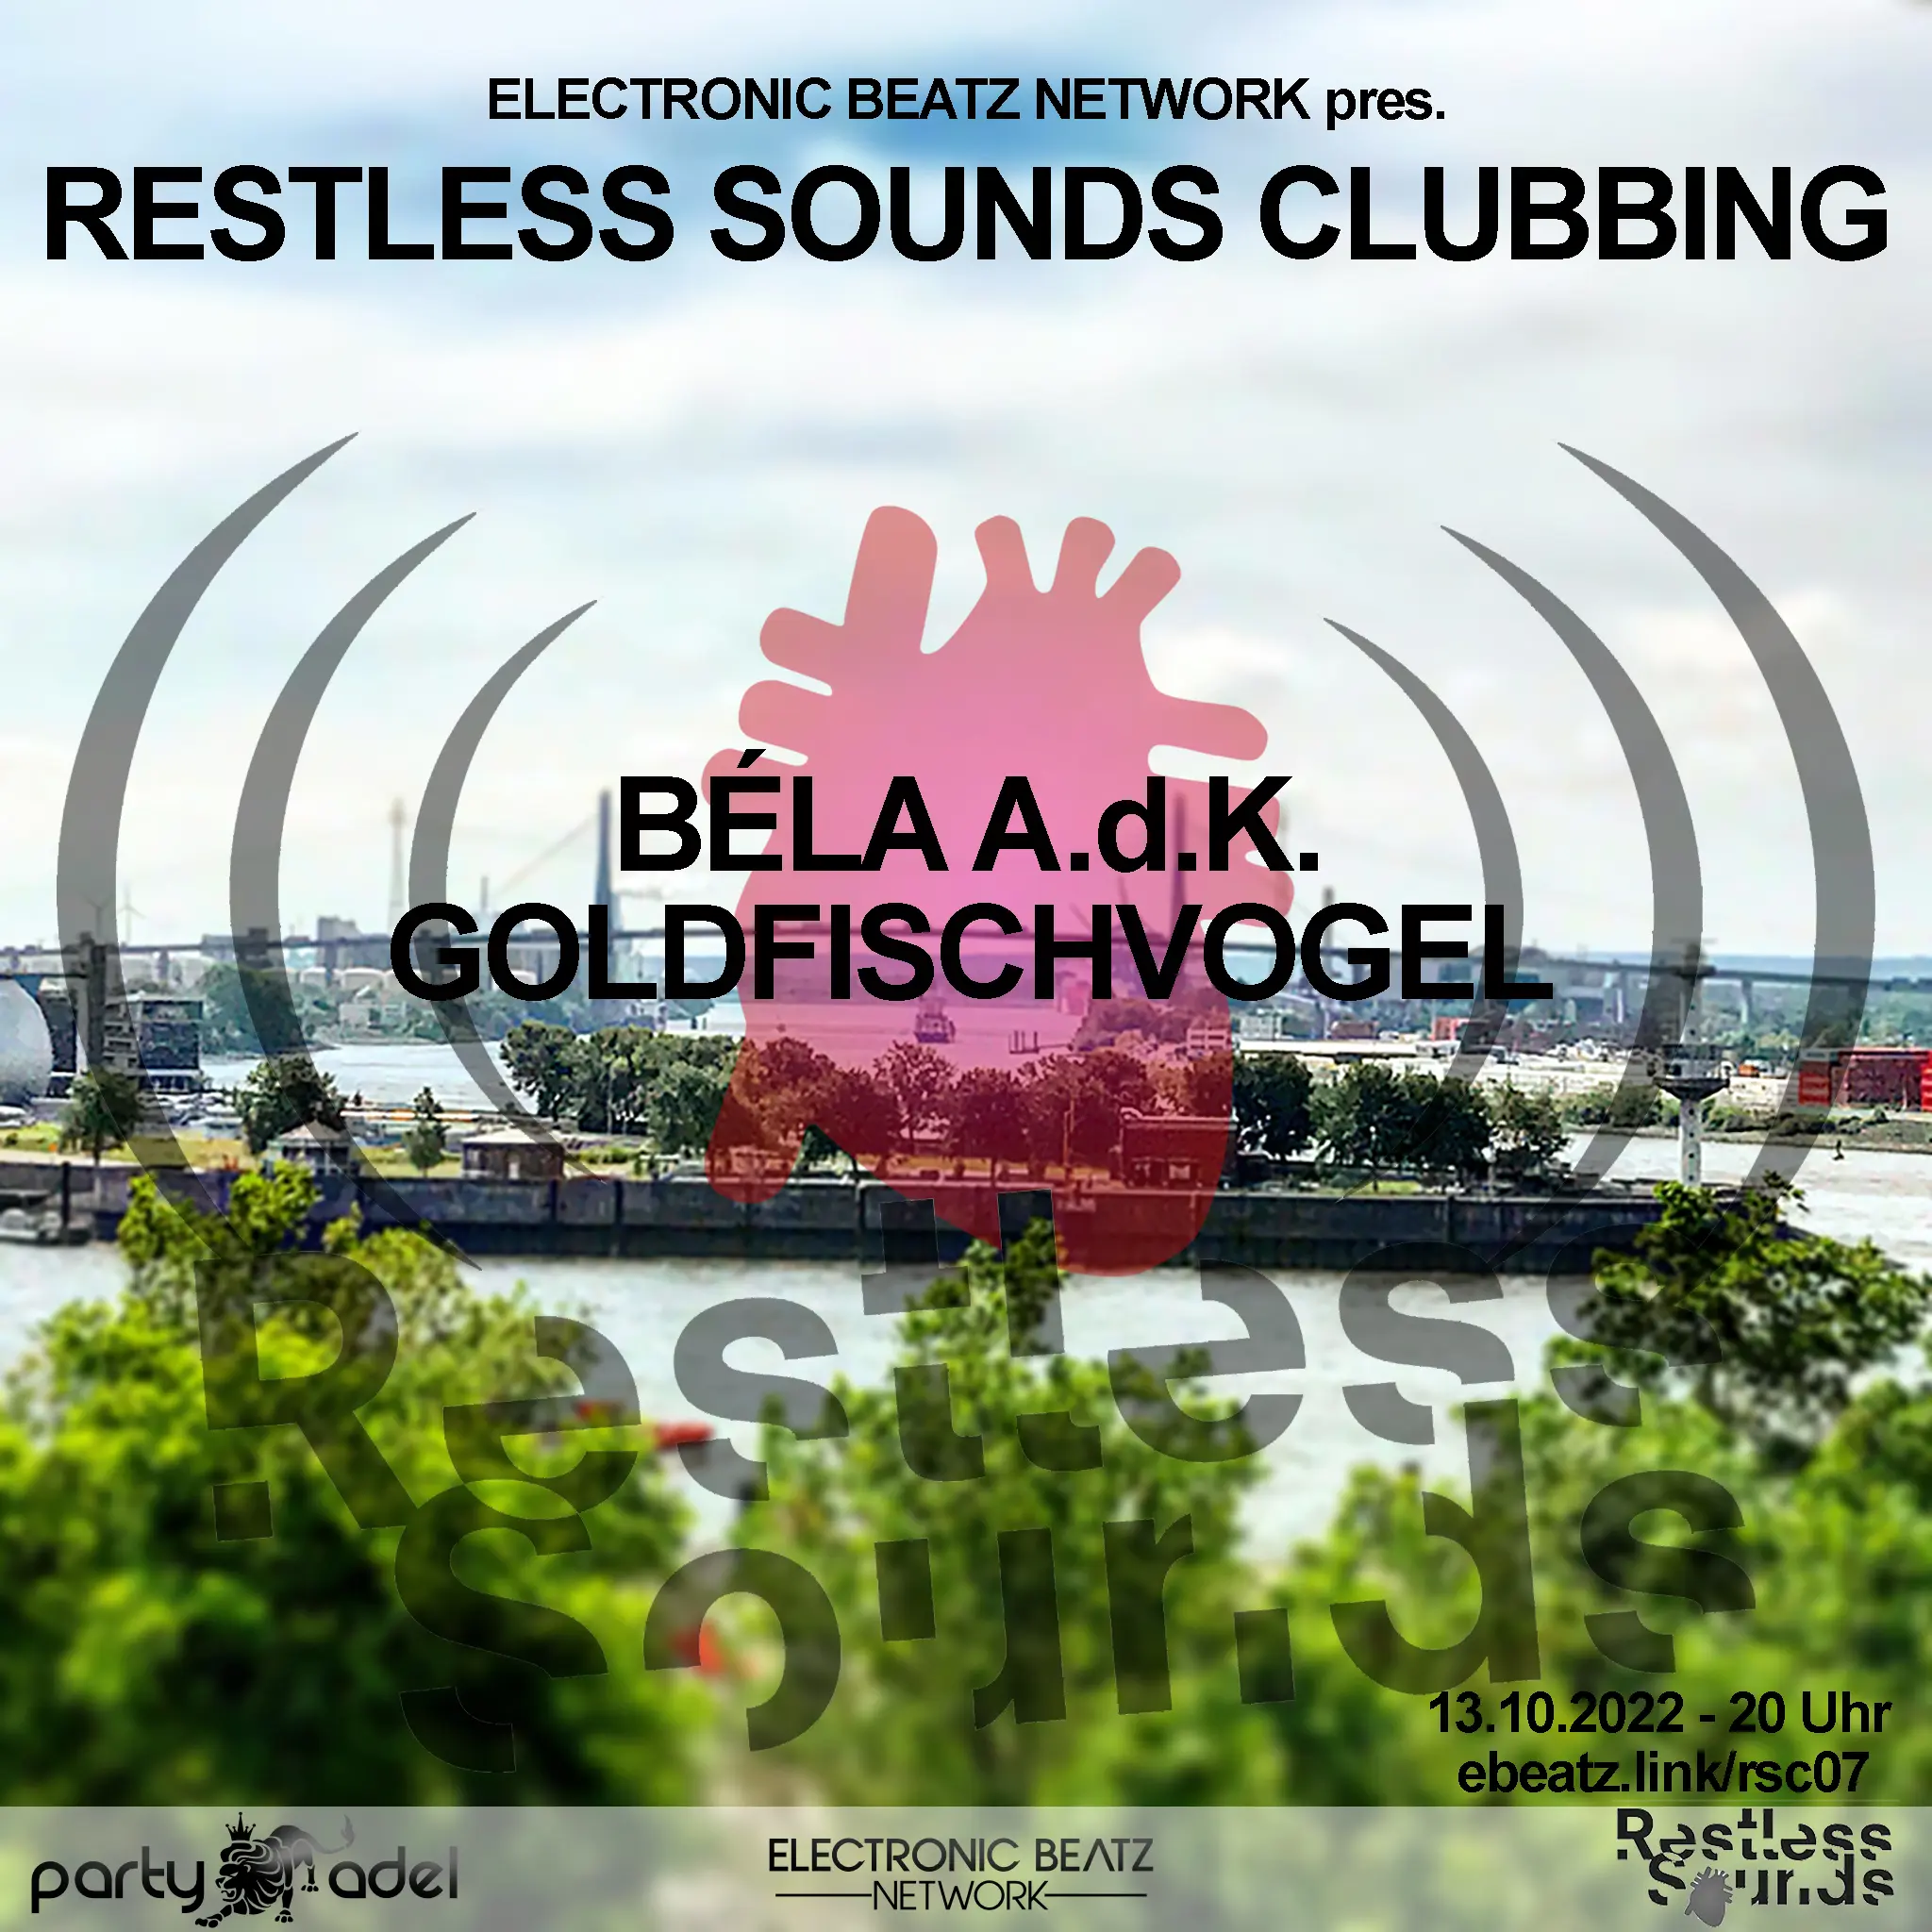  Restless Sounds Clubbing (11.10.2022)